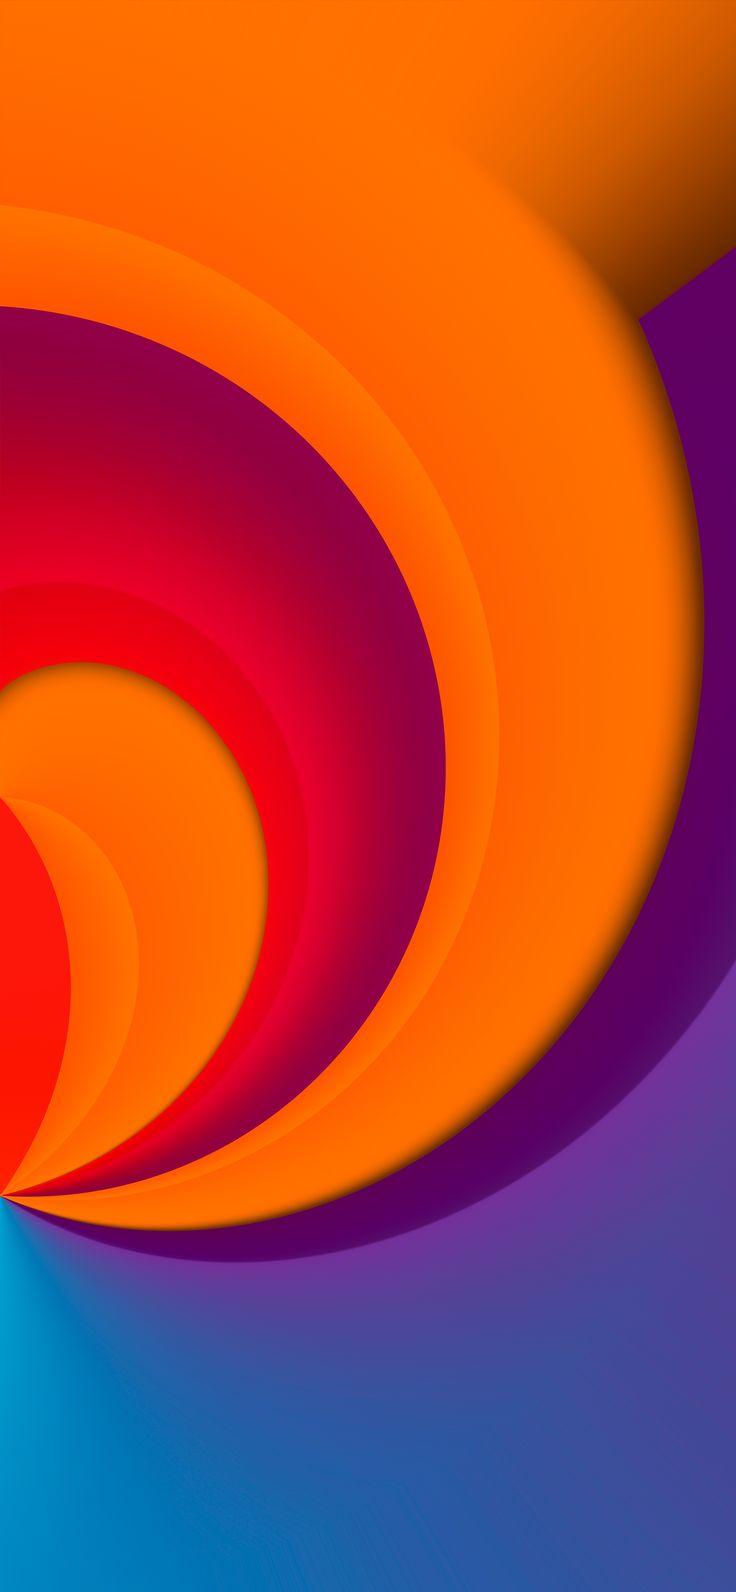 Ios Beta Swoops Of Orange And Pruple By Hk3ton Abstract